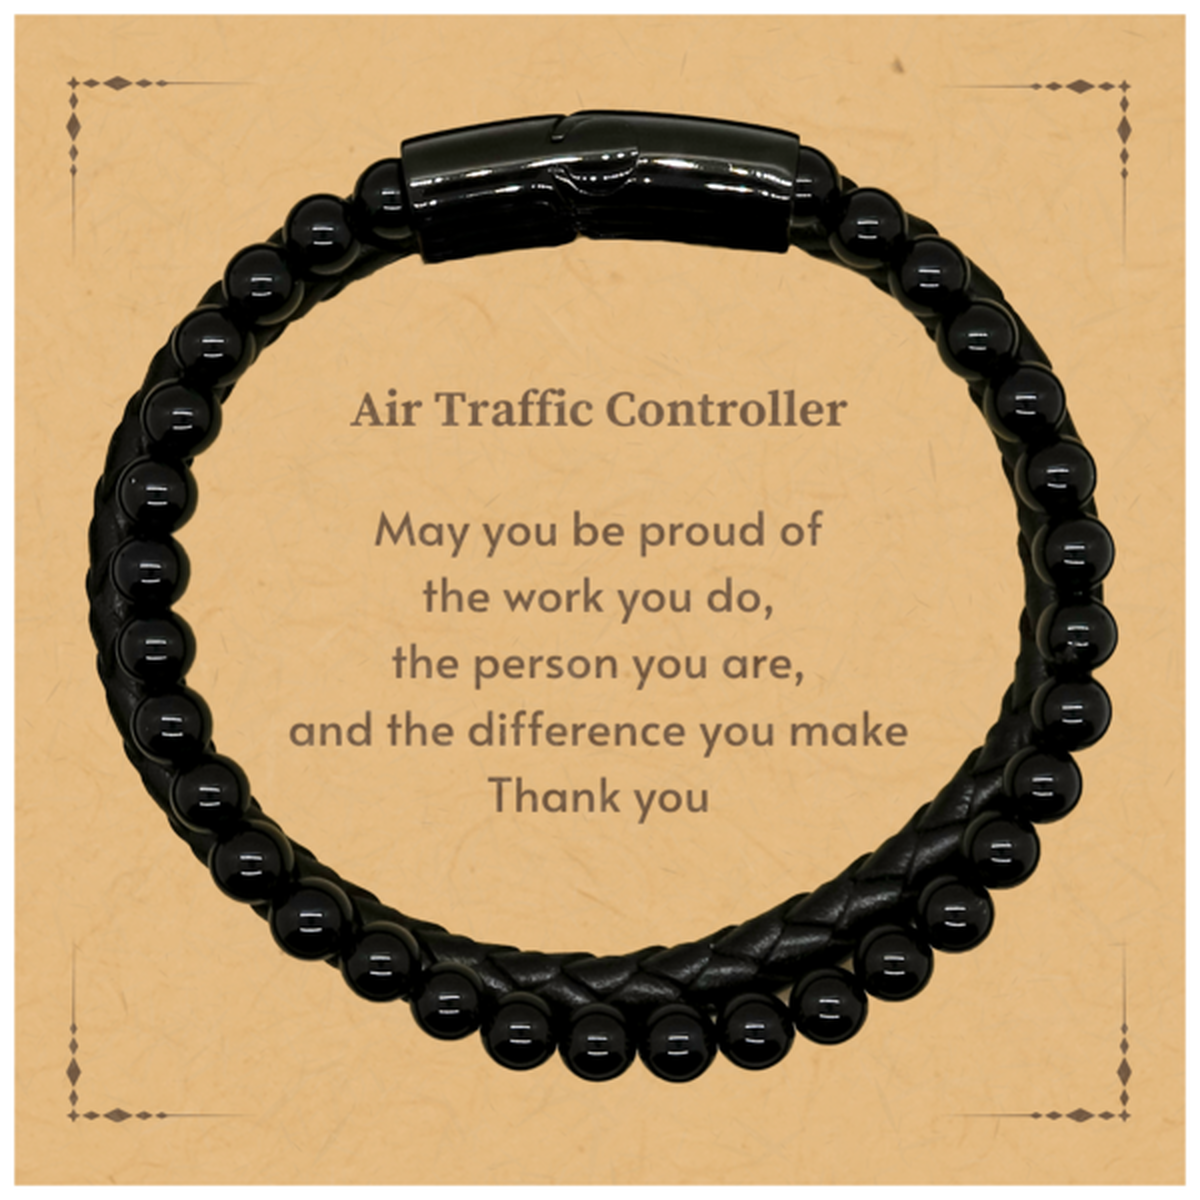 Heartwarming Stone Leather Bracelets Retirement Coworkers Gifts for Air Traffic Controller, Air Traffic Controller May You be proud of the work you do, the person you are Gifts for Boss Men Women Friends